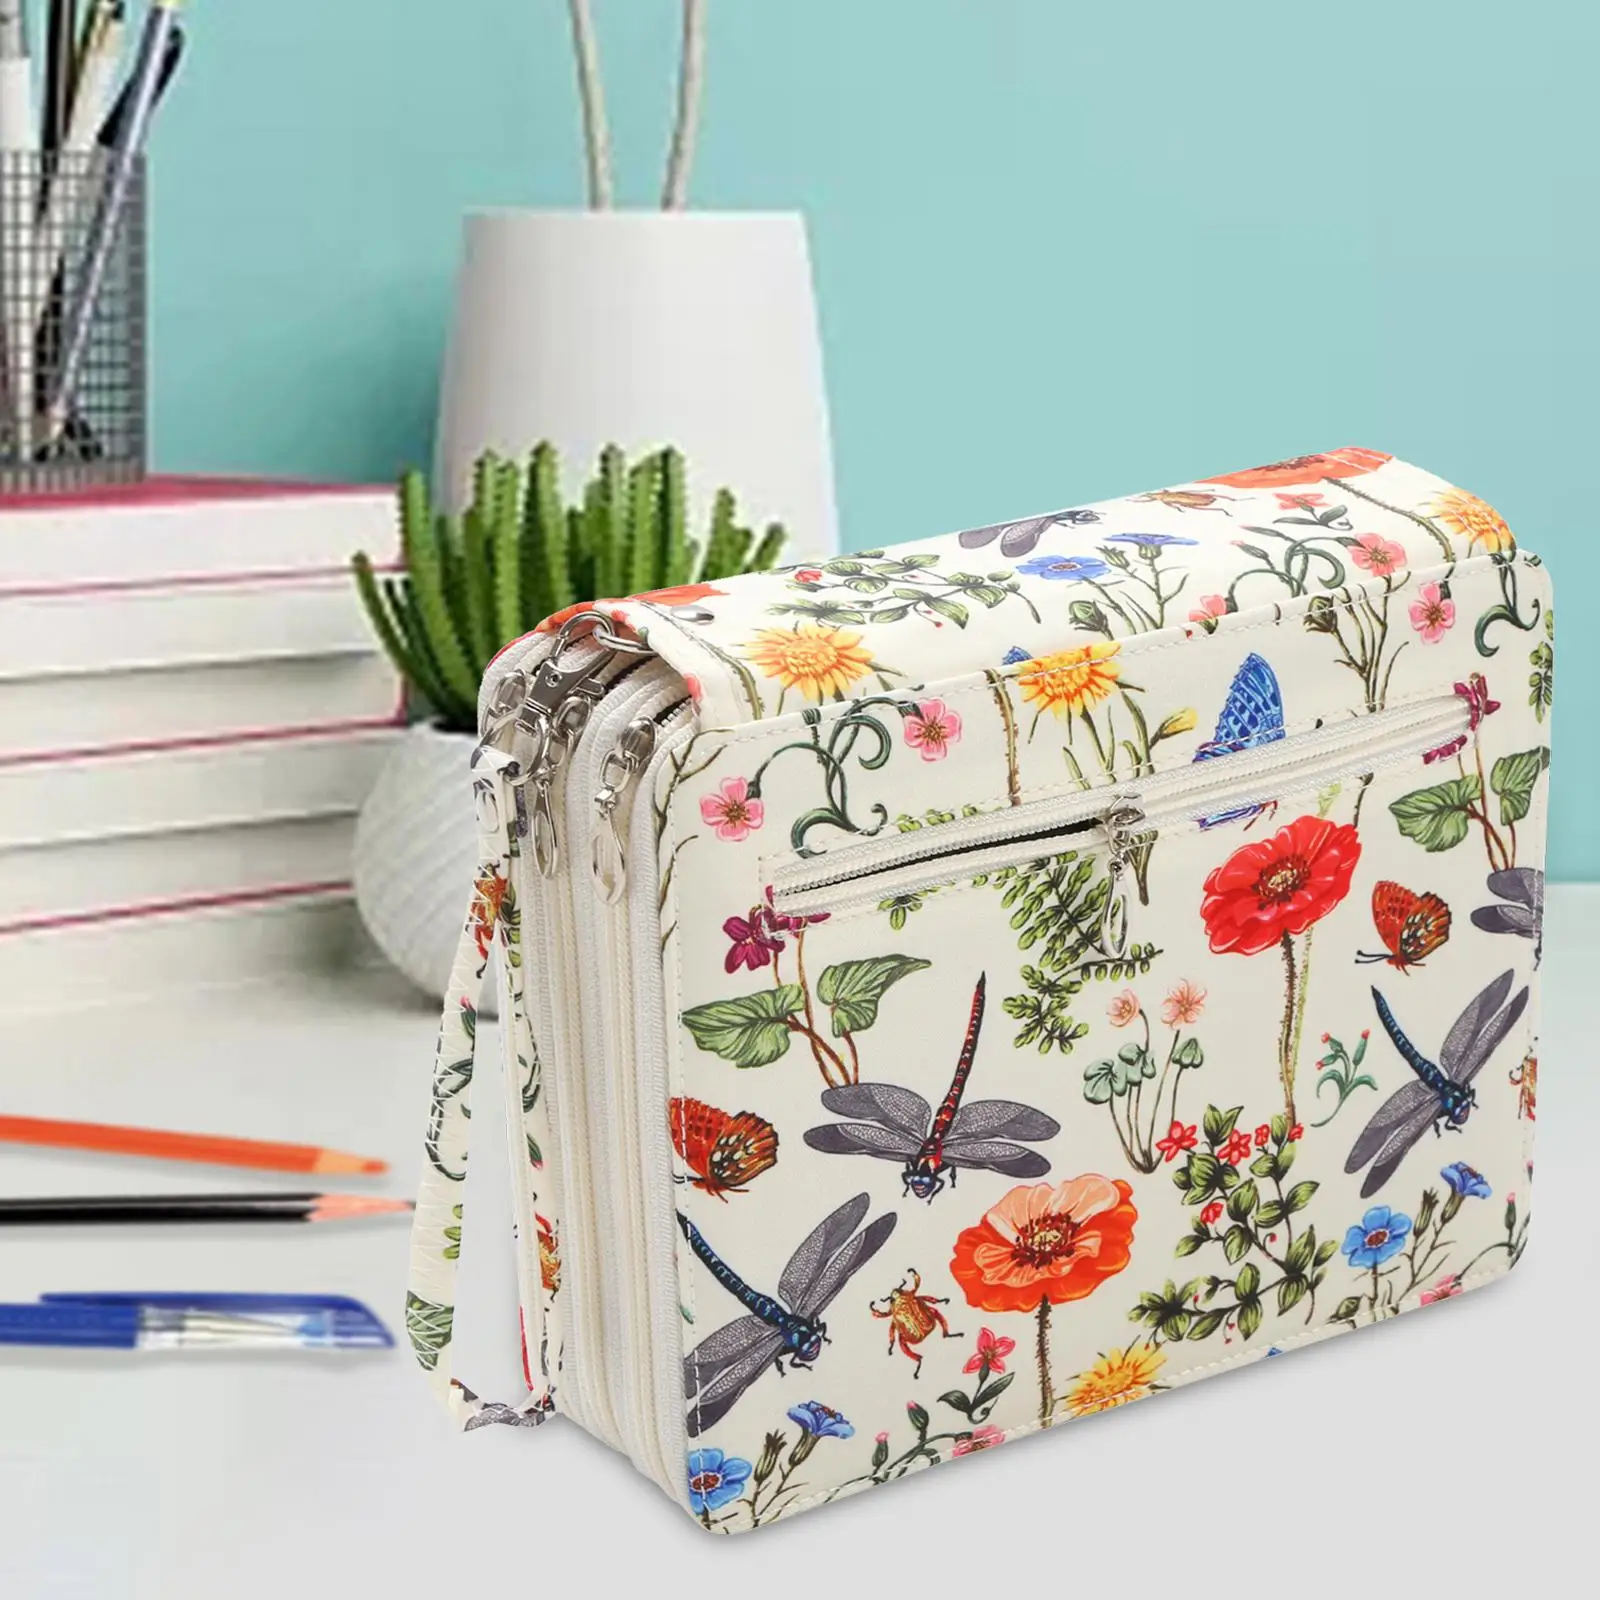 Watercolor Bag 120 Slot Storage Colored Pencil Case for Travel School Adults